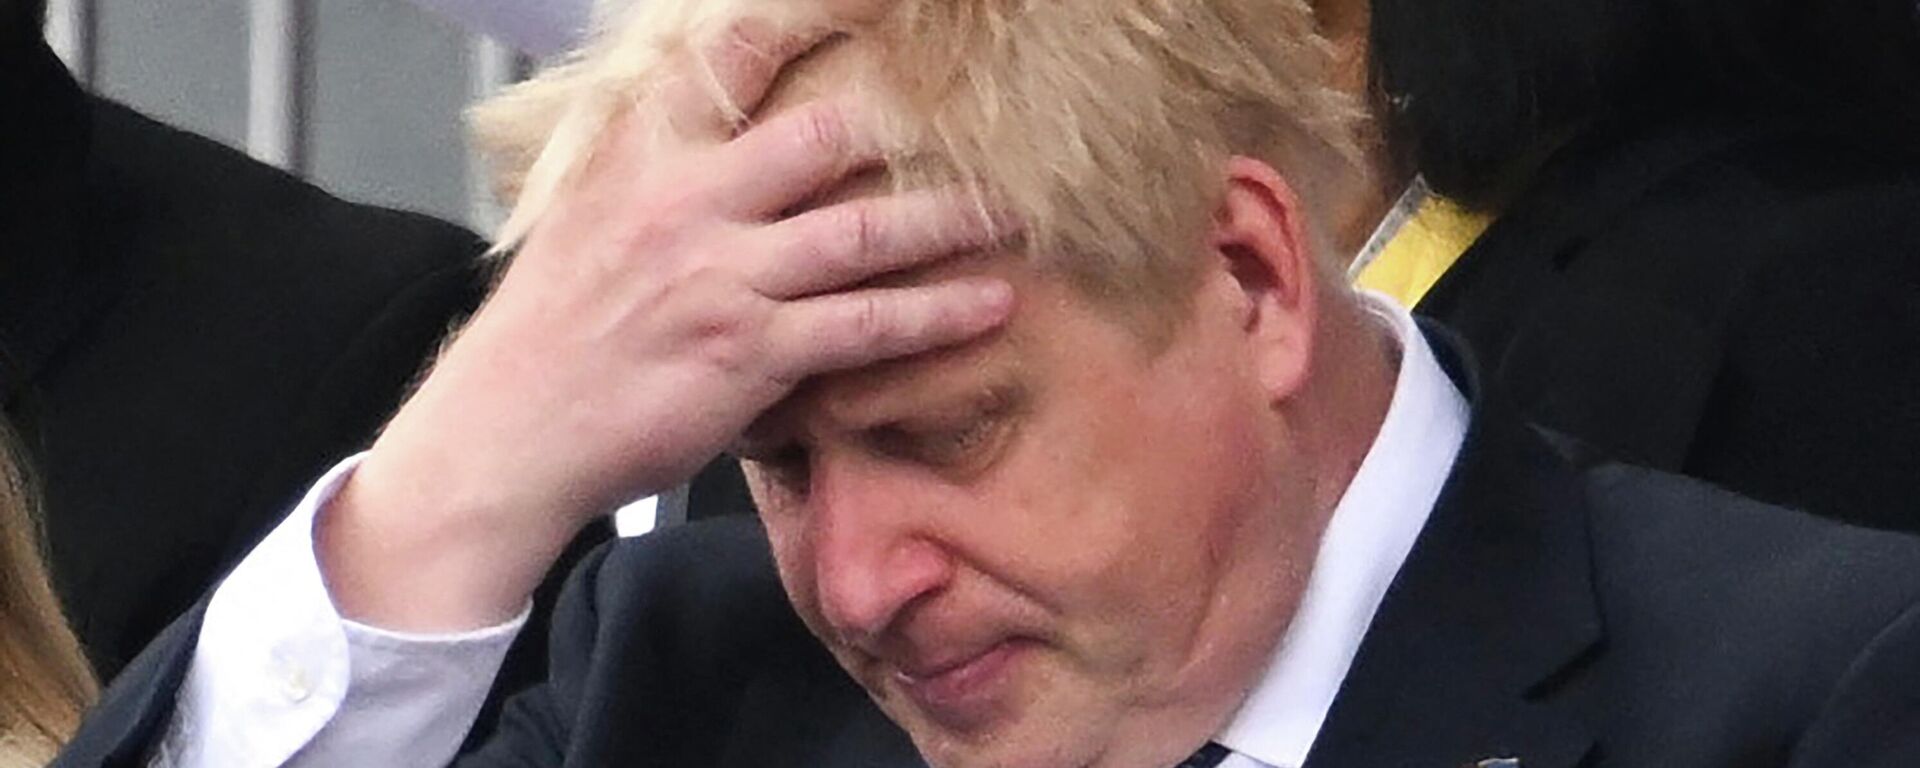 (FILES) In this file photo taken on June 5, 2022 shows Britain's Prime Minister Boris Johnson reacts during the Platinum Pageant in London on June 5, 2022 as part of Queen Elizabeth II's platinum jubilee celebrations - Sputnik International, 1920, 07.06.2022